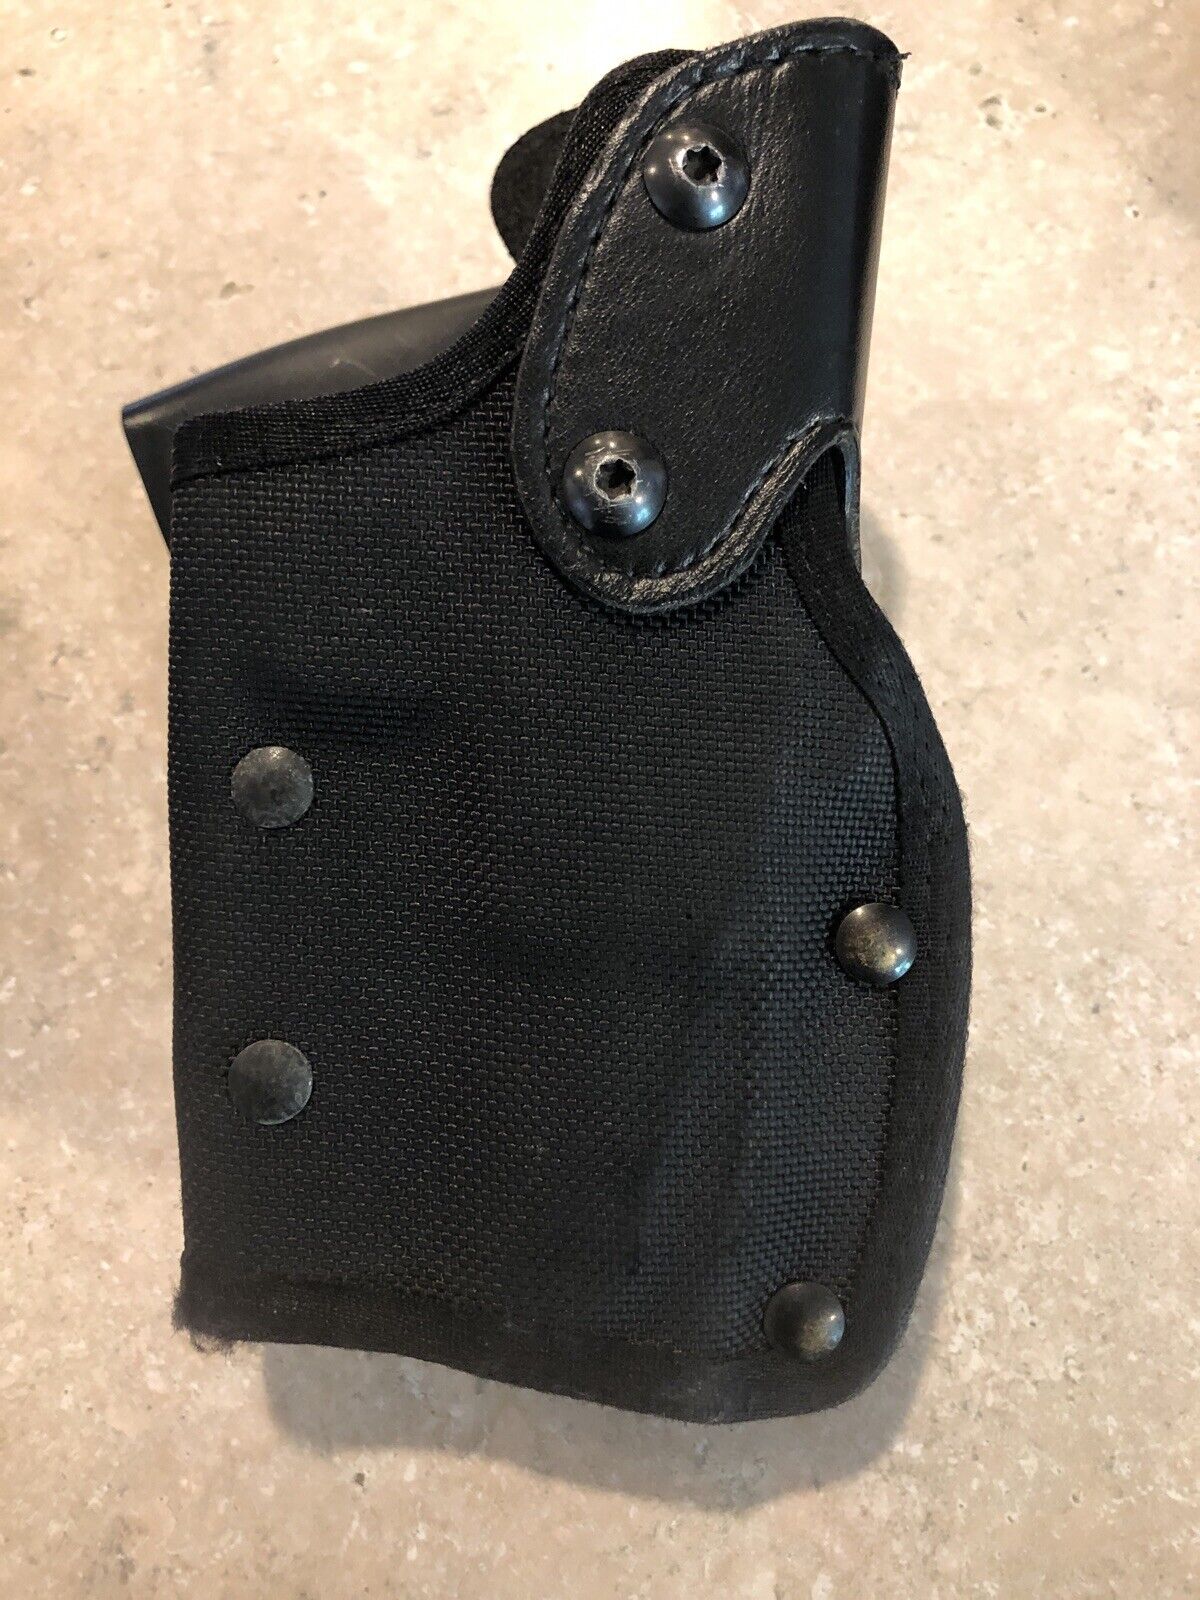 Gould & Max 60% OFF Genuine Free Shipping Goodrich Double Retention Duty PDX 20 Glock Holster G37